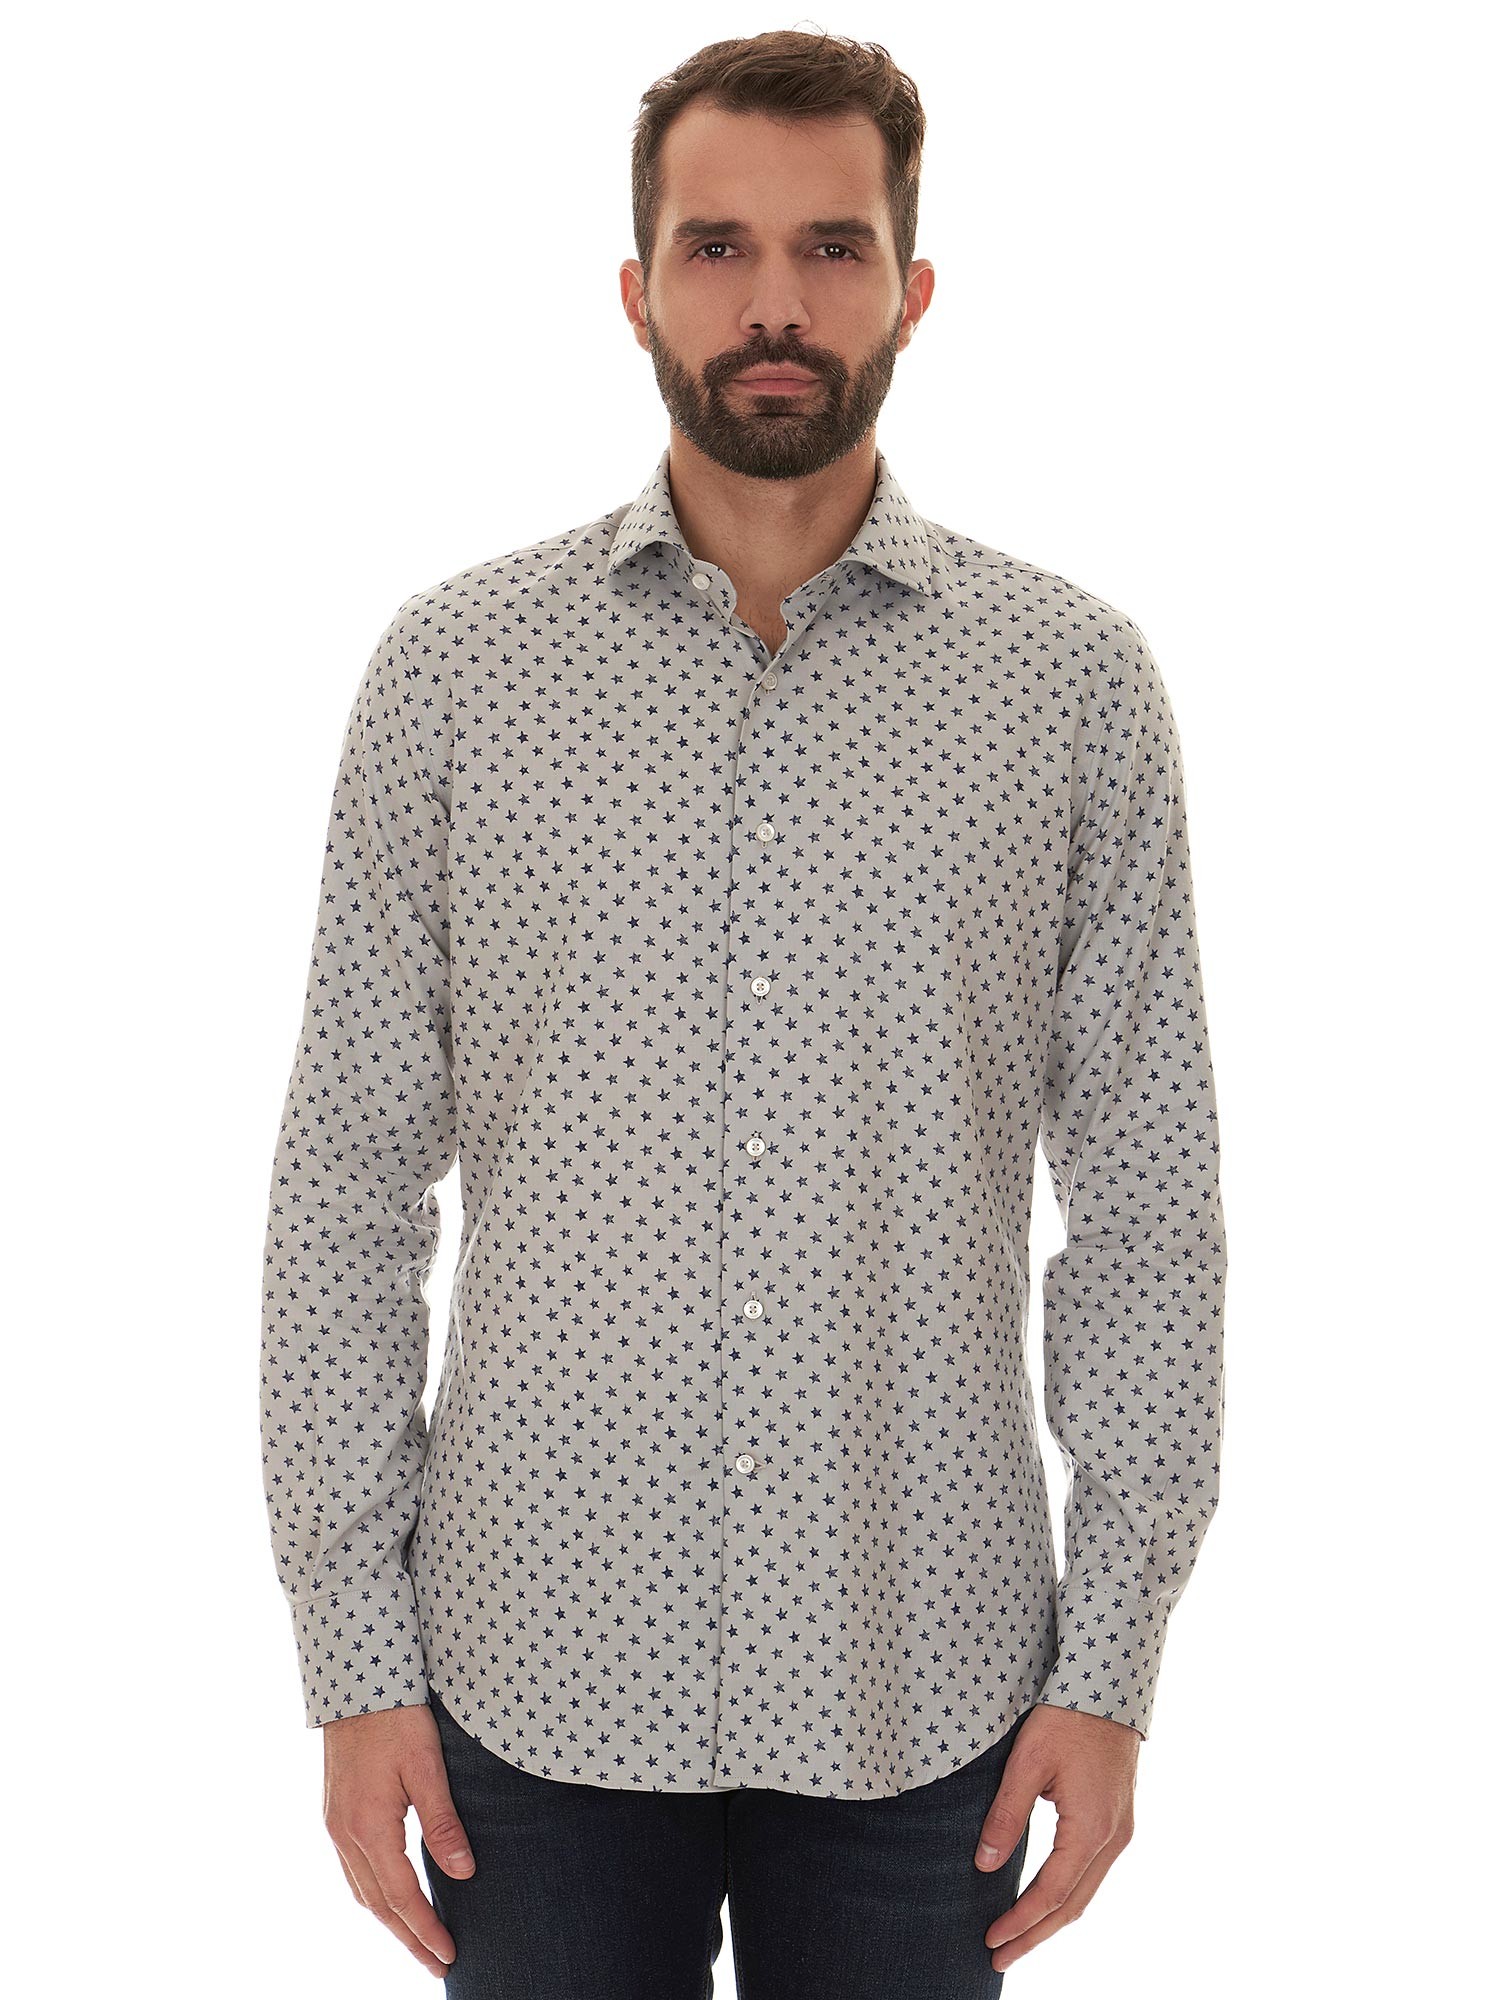 Grey star patterned Delsiena Shirt with cutaway collar